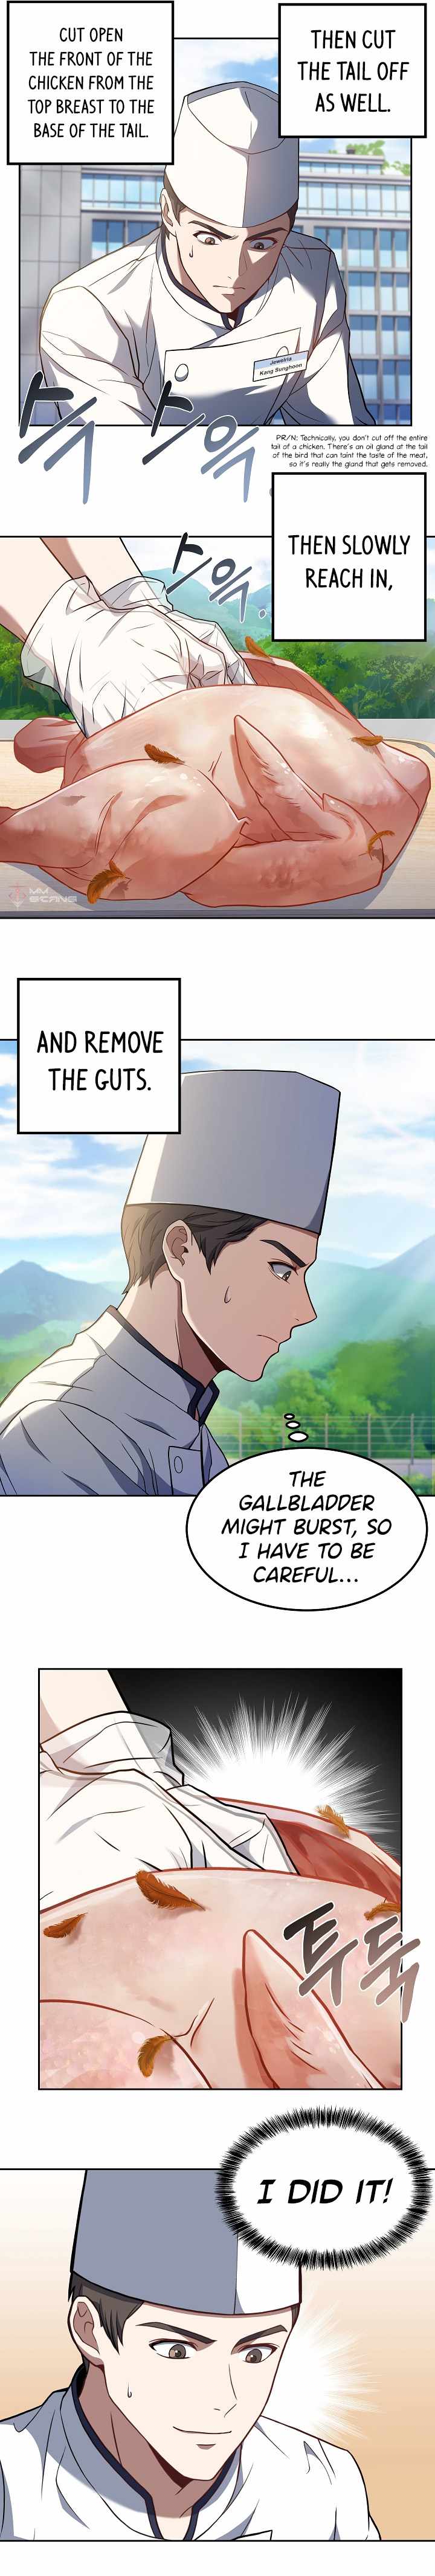 Youngest Chef from the 3rd Rate Hotel chapter 22